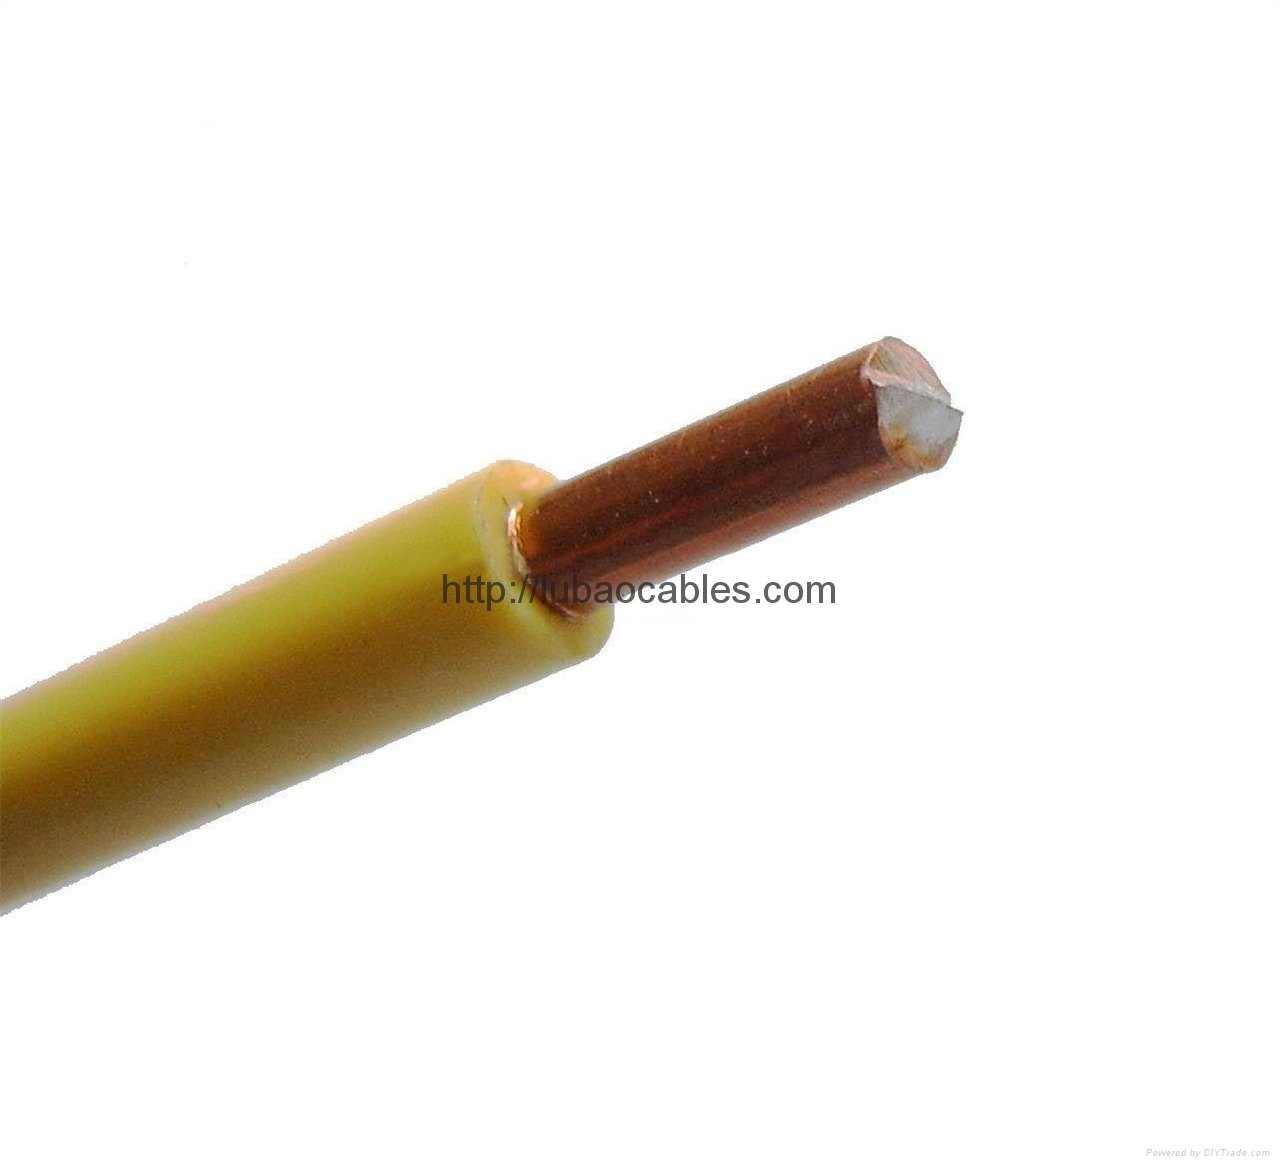 PVC insulation residential wire   IEC60227 2